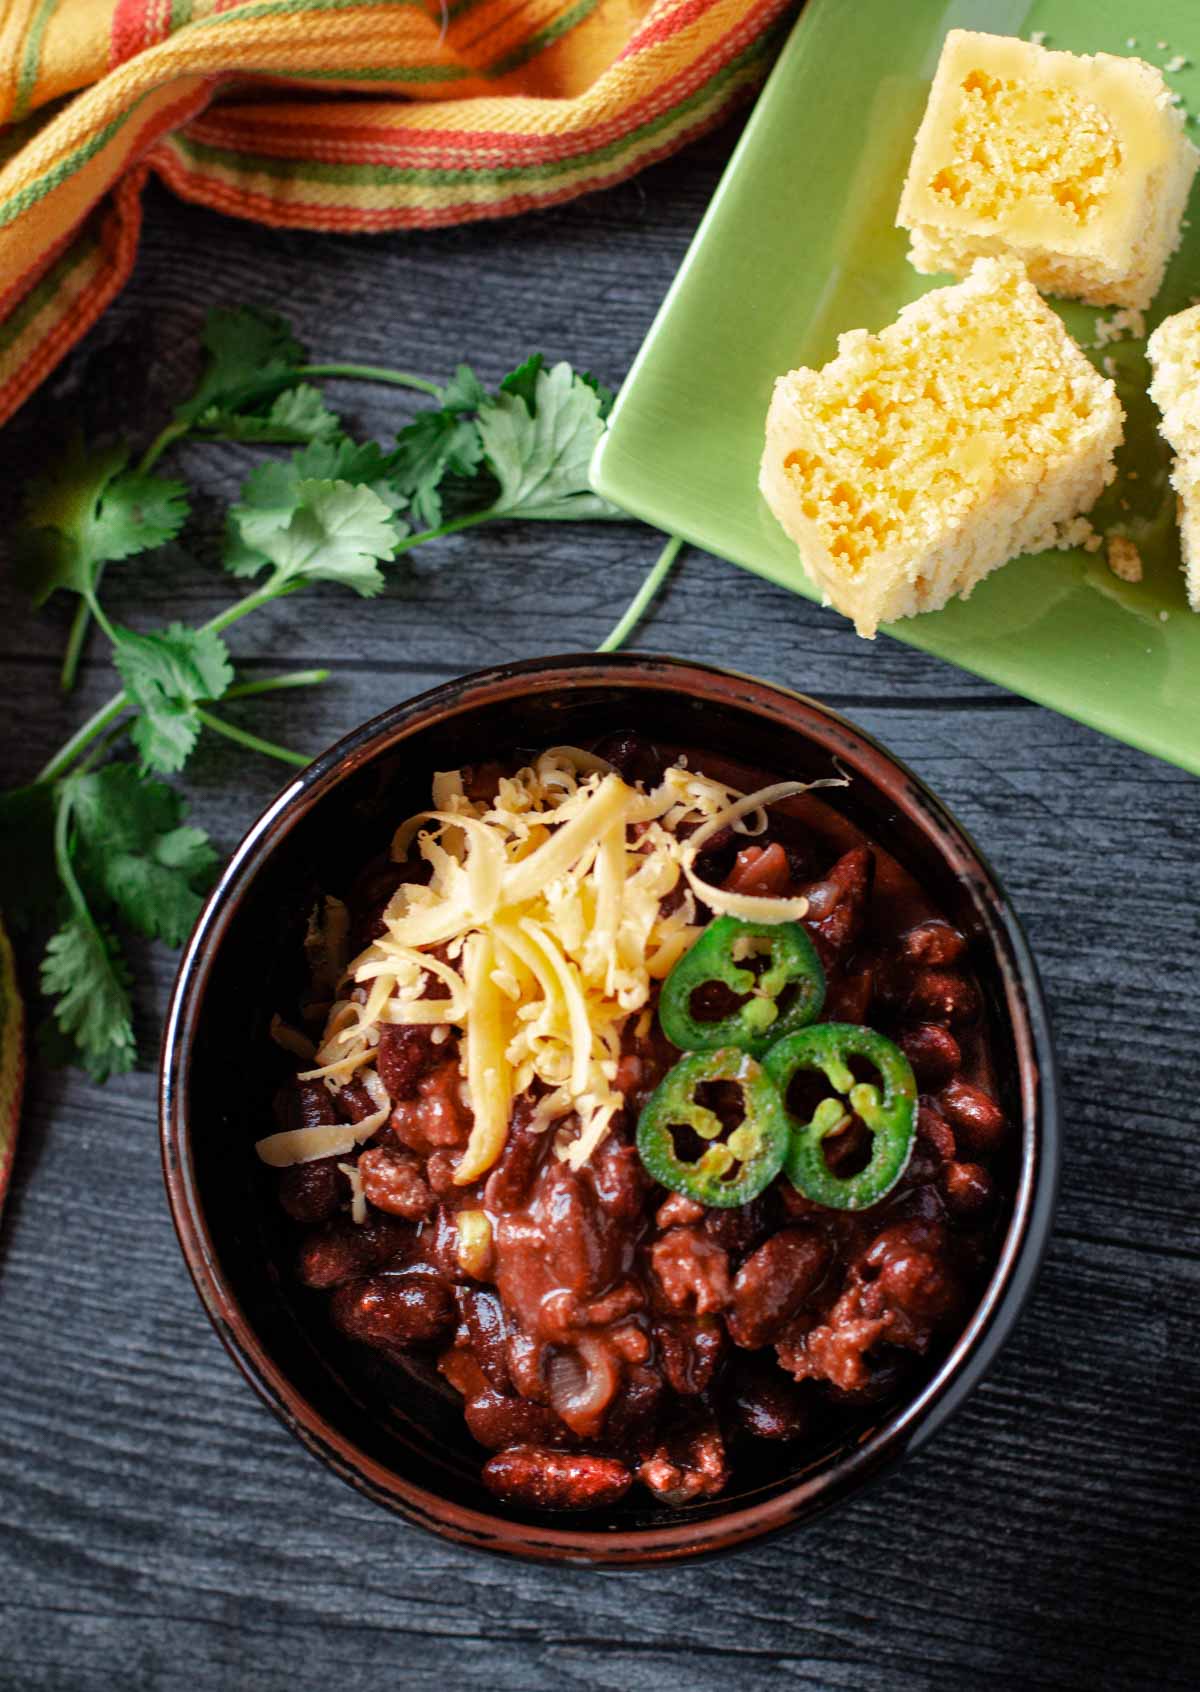 Cowboy chili topped with sliced jalapenos and grated cheddar cheese